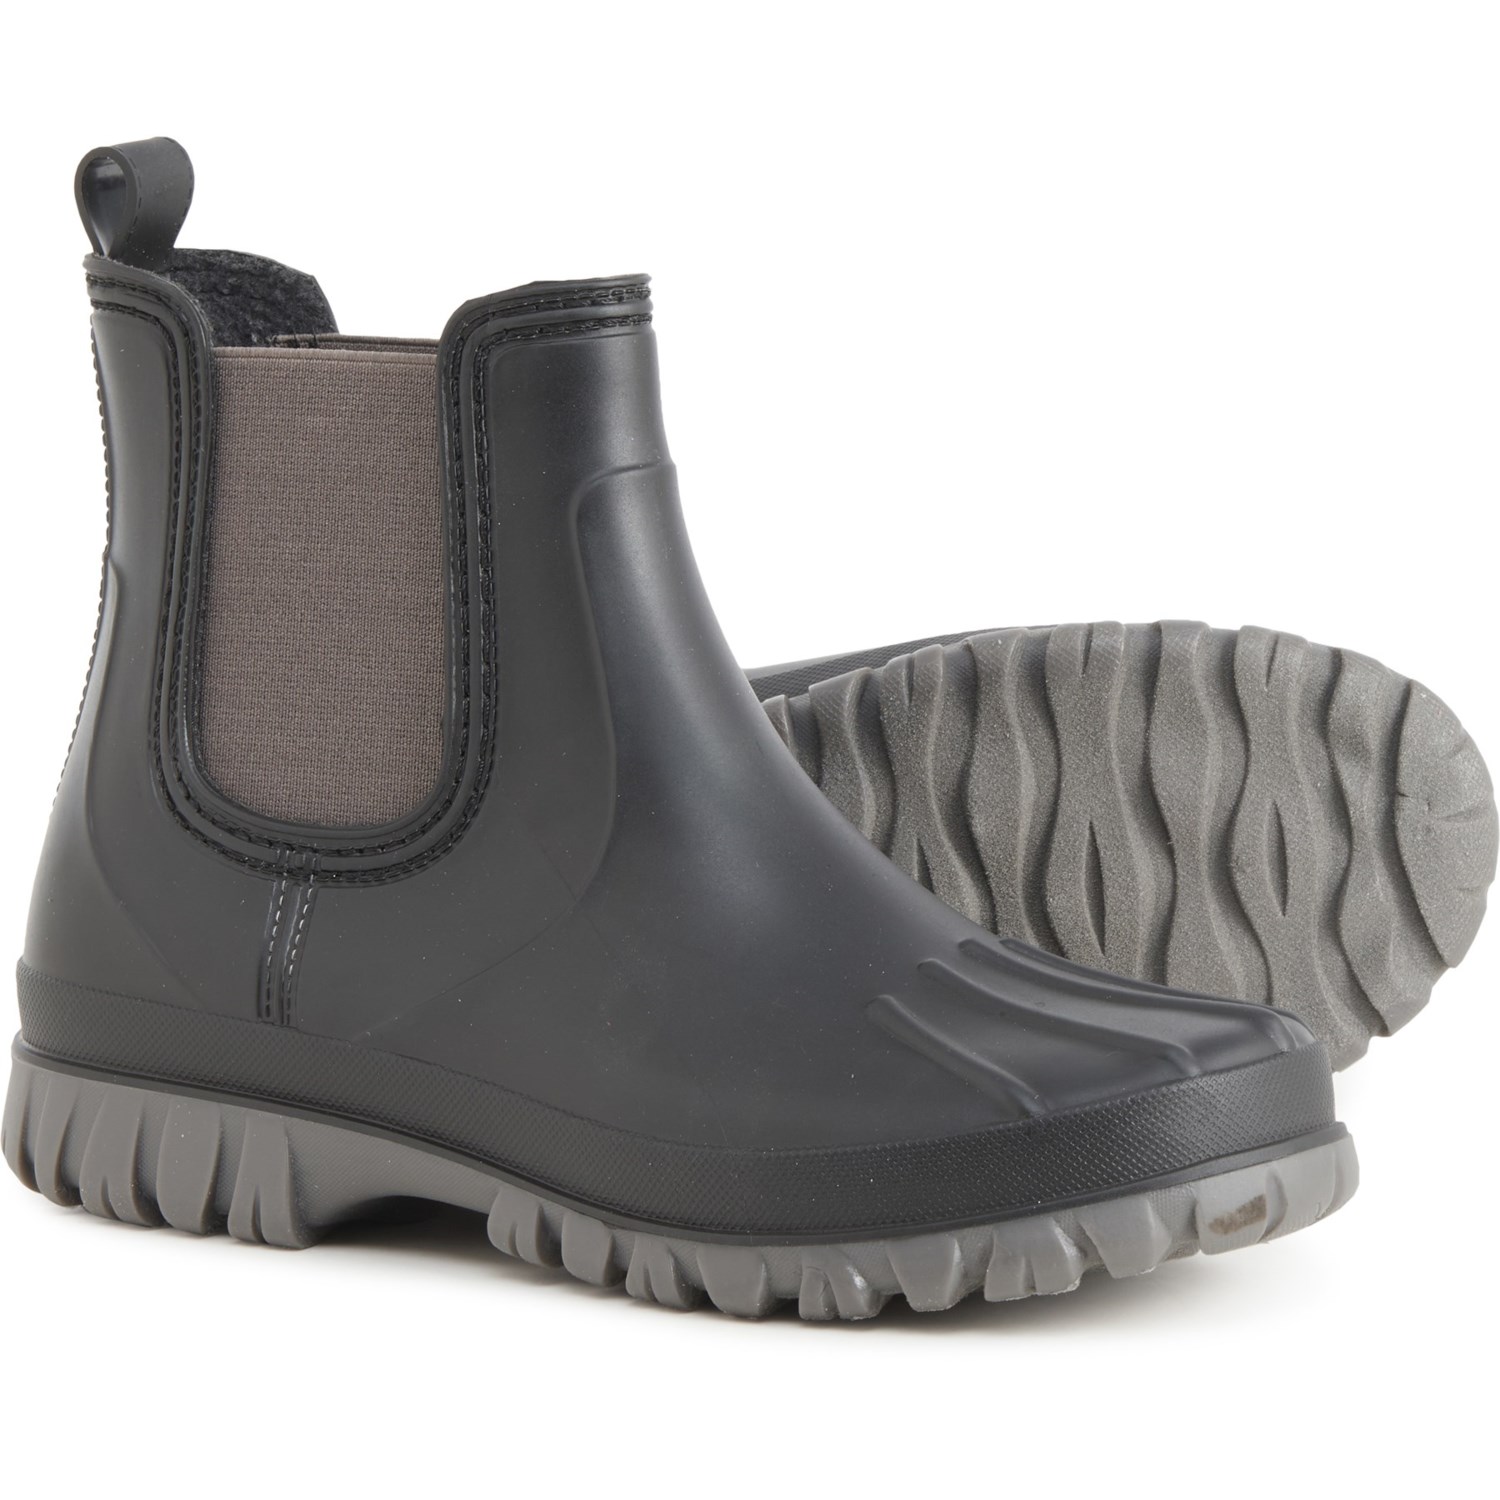 Cougar Tangent Chelsea Rain Boots (For Women) - Save 49%